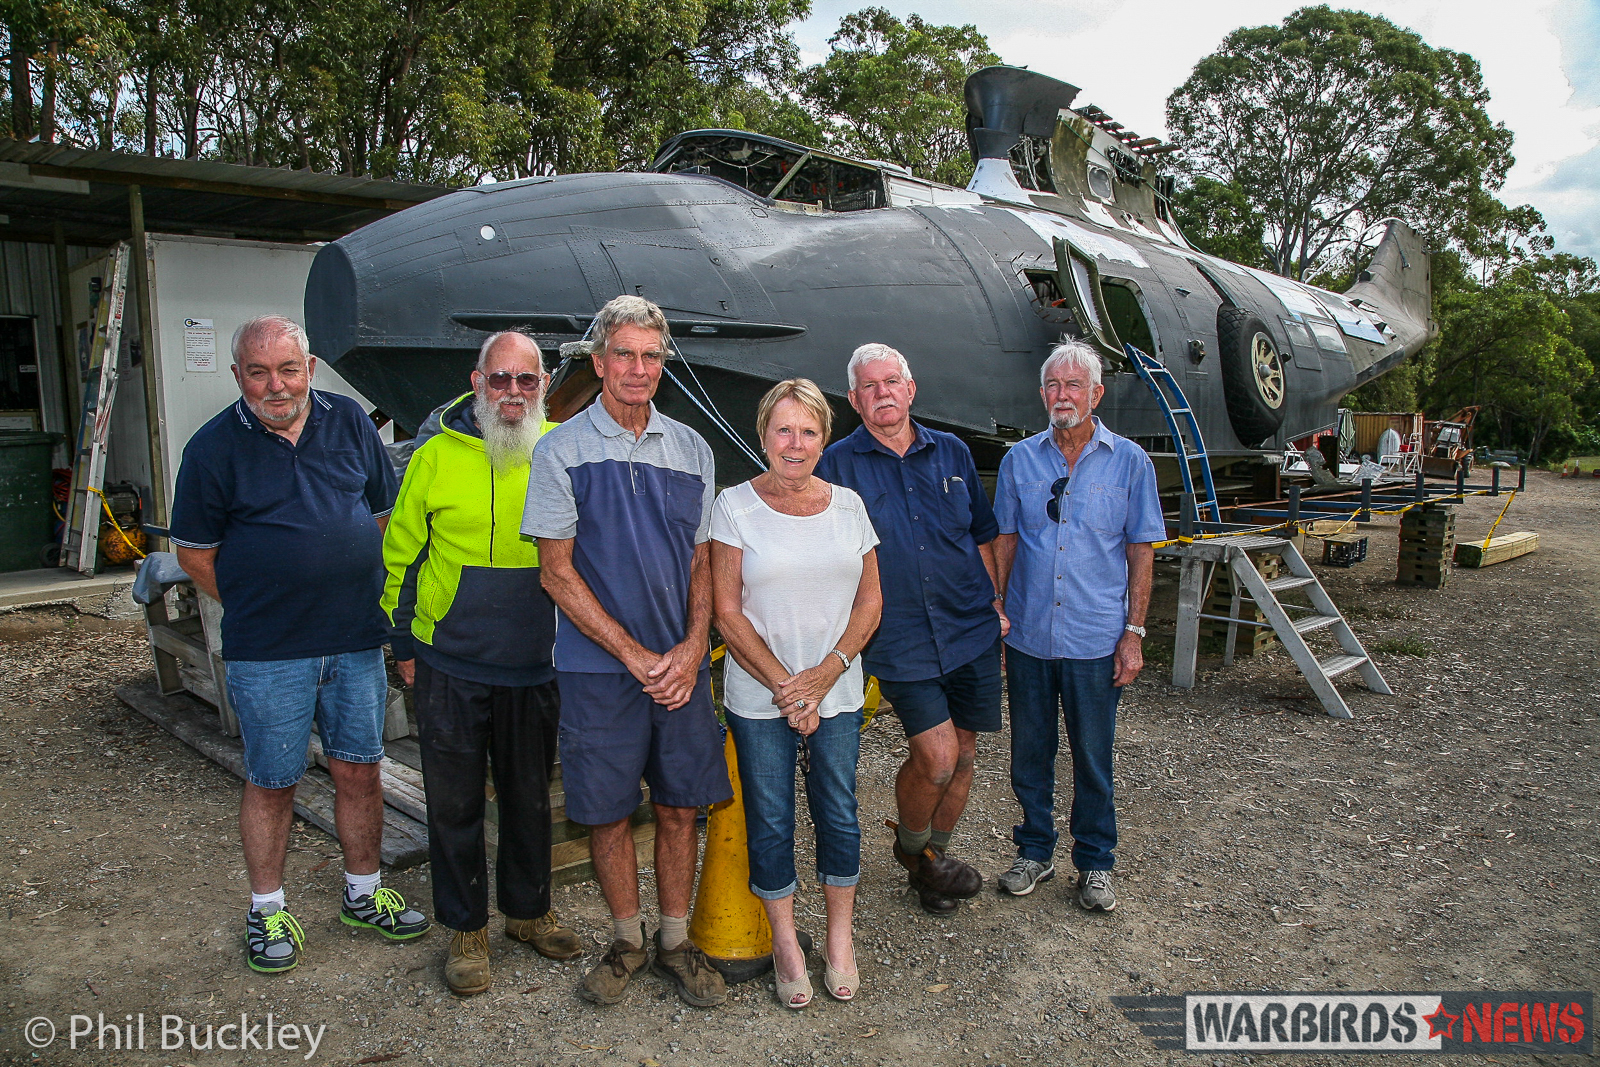 Some of the team involved with restoring the Catalina. (photo by Phil Buckley)